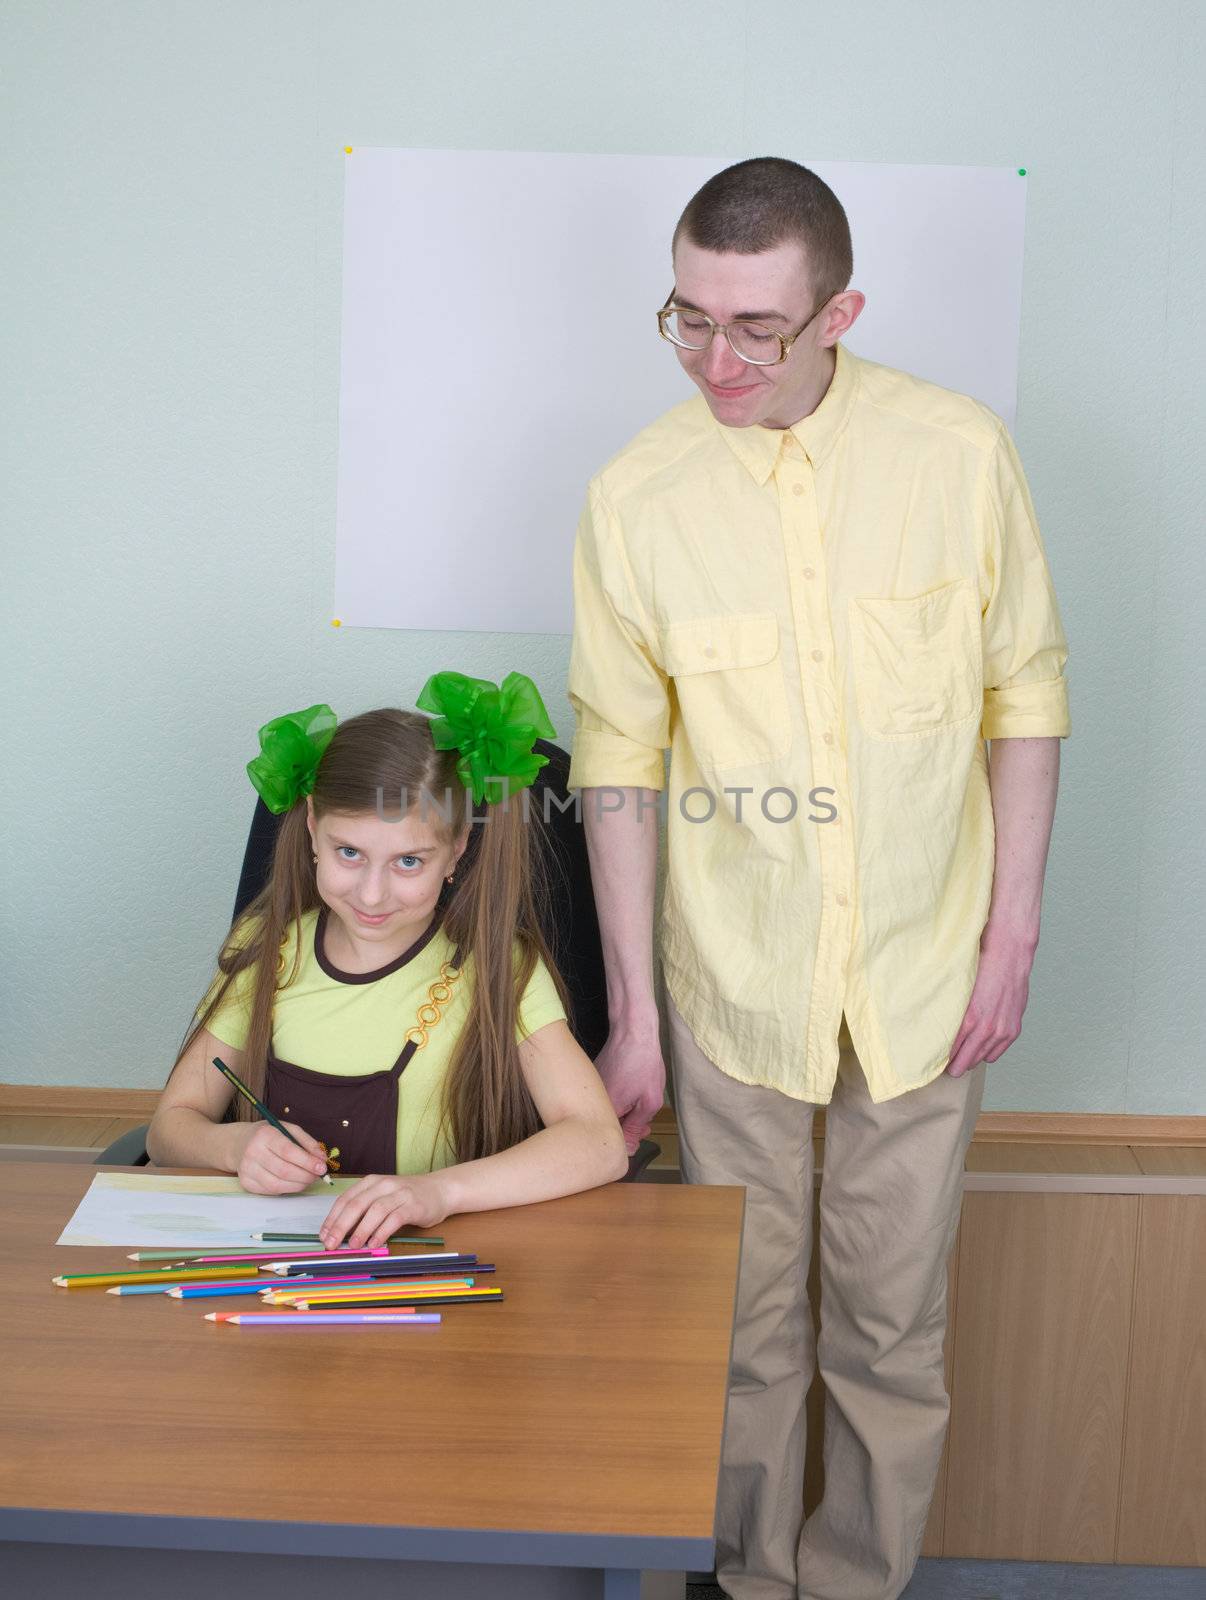 The girl and brother with color pencils